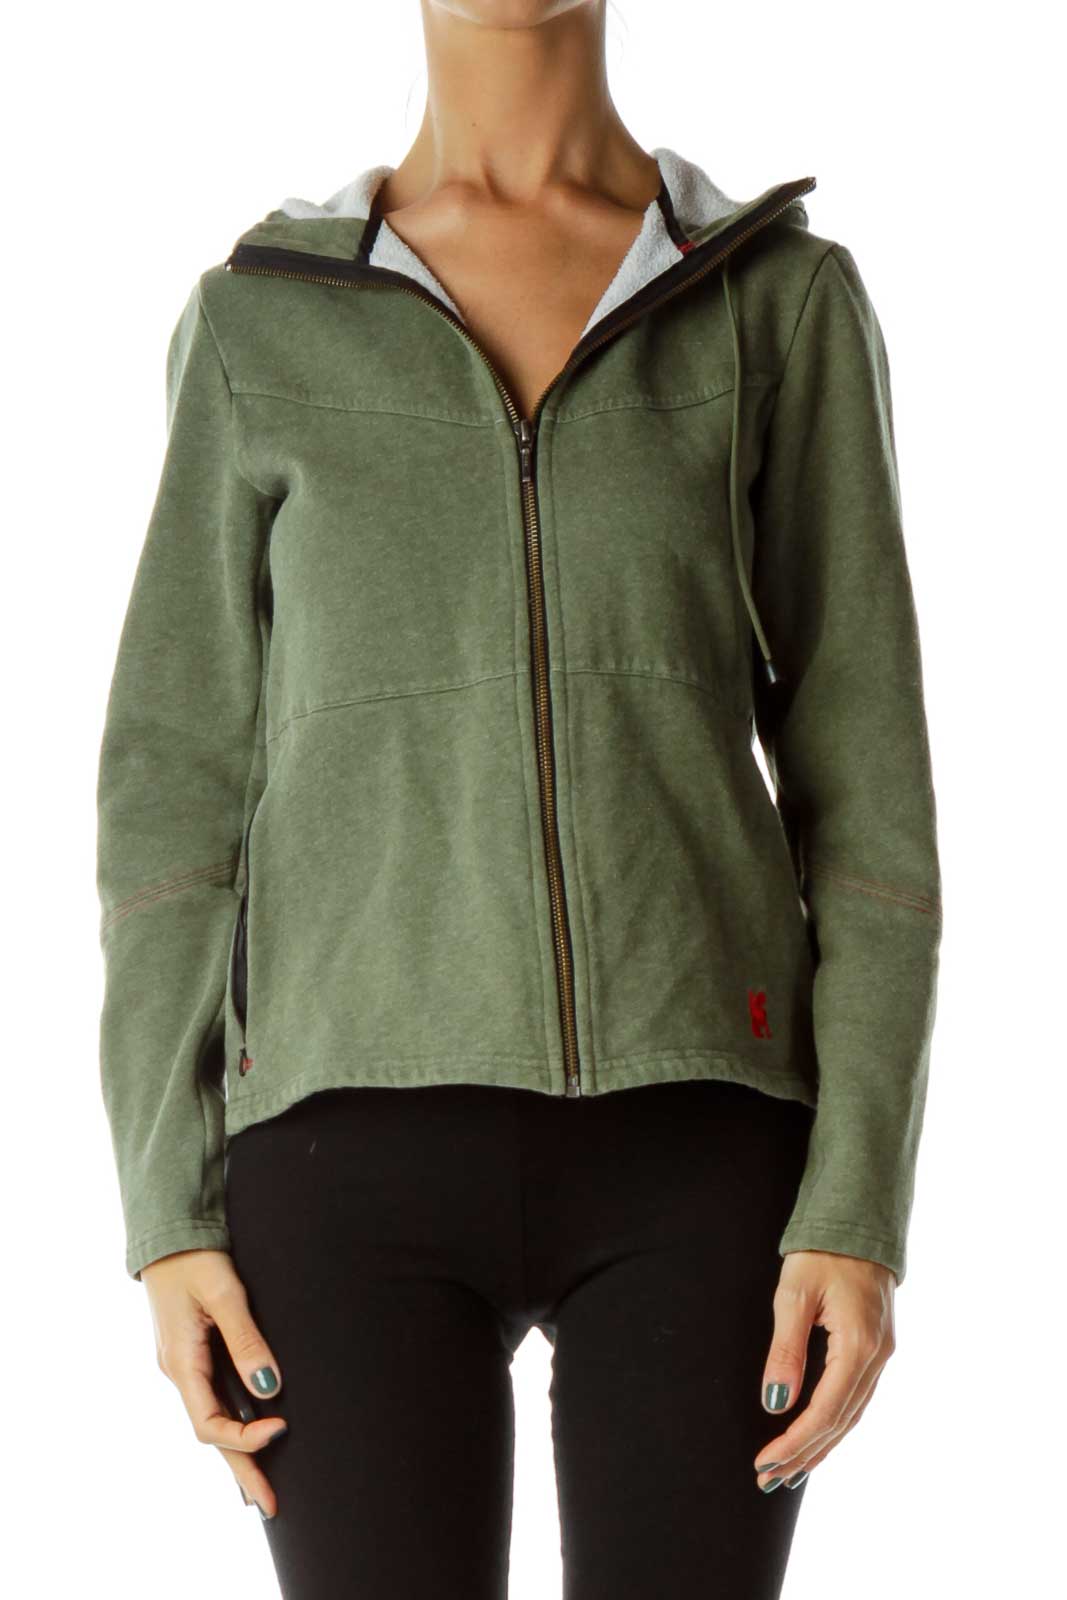 Green Hooded Zippered Sweater Front